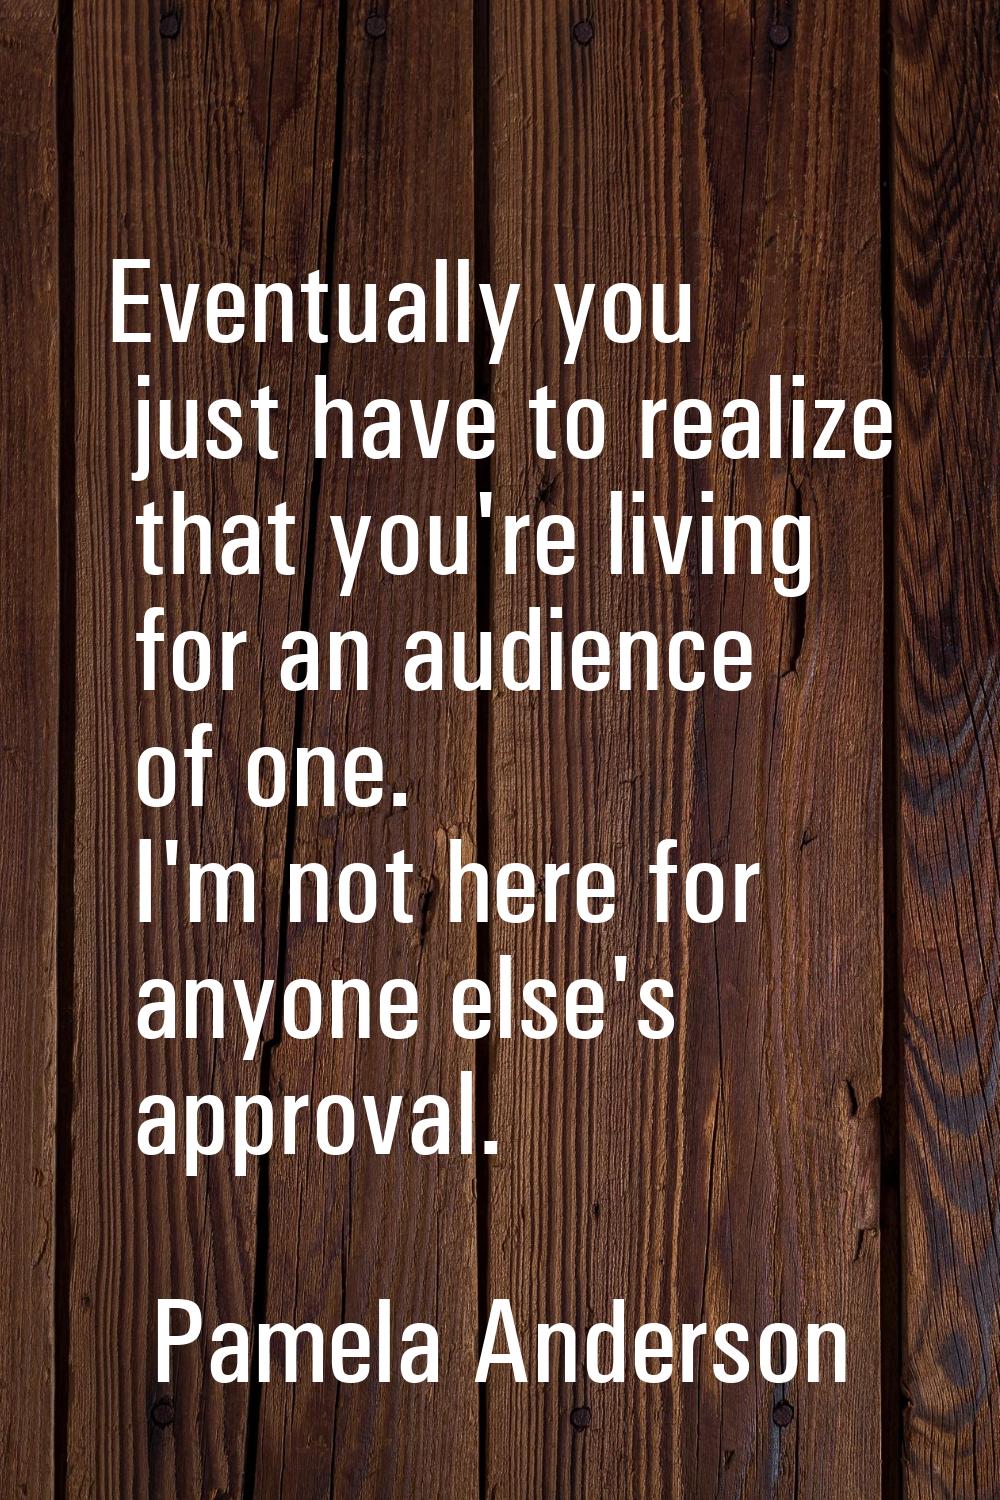 Eventually you just have to realize that you're living for an audience of one. I'm not here for any